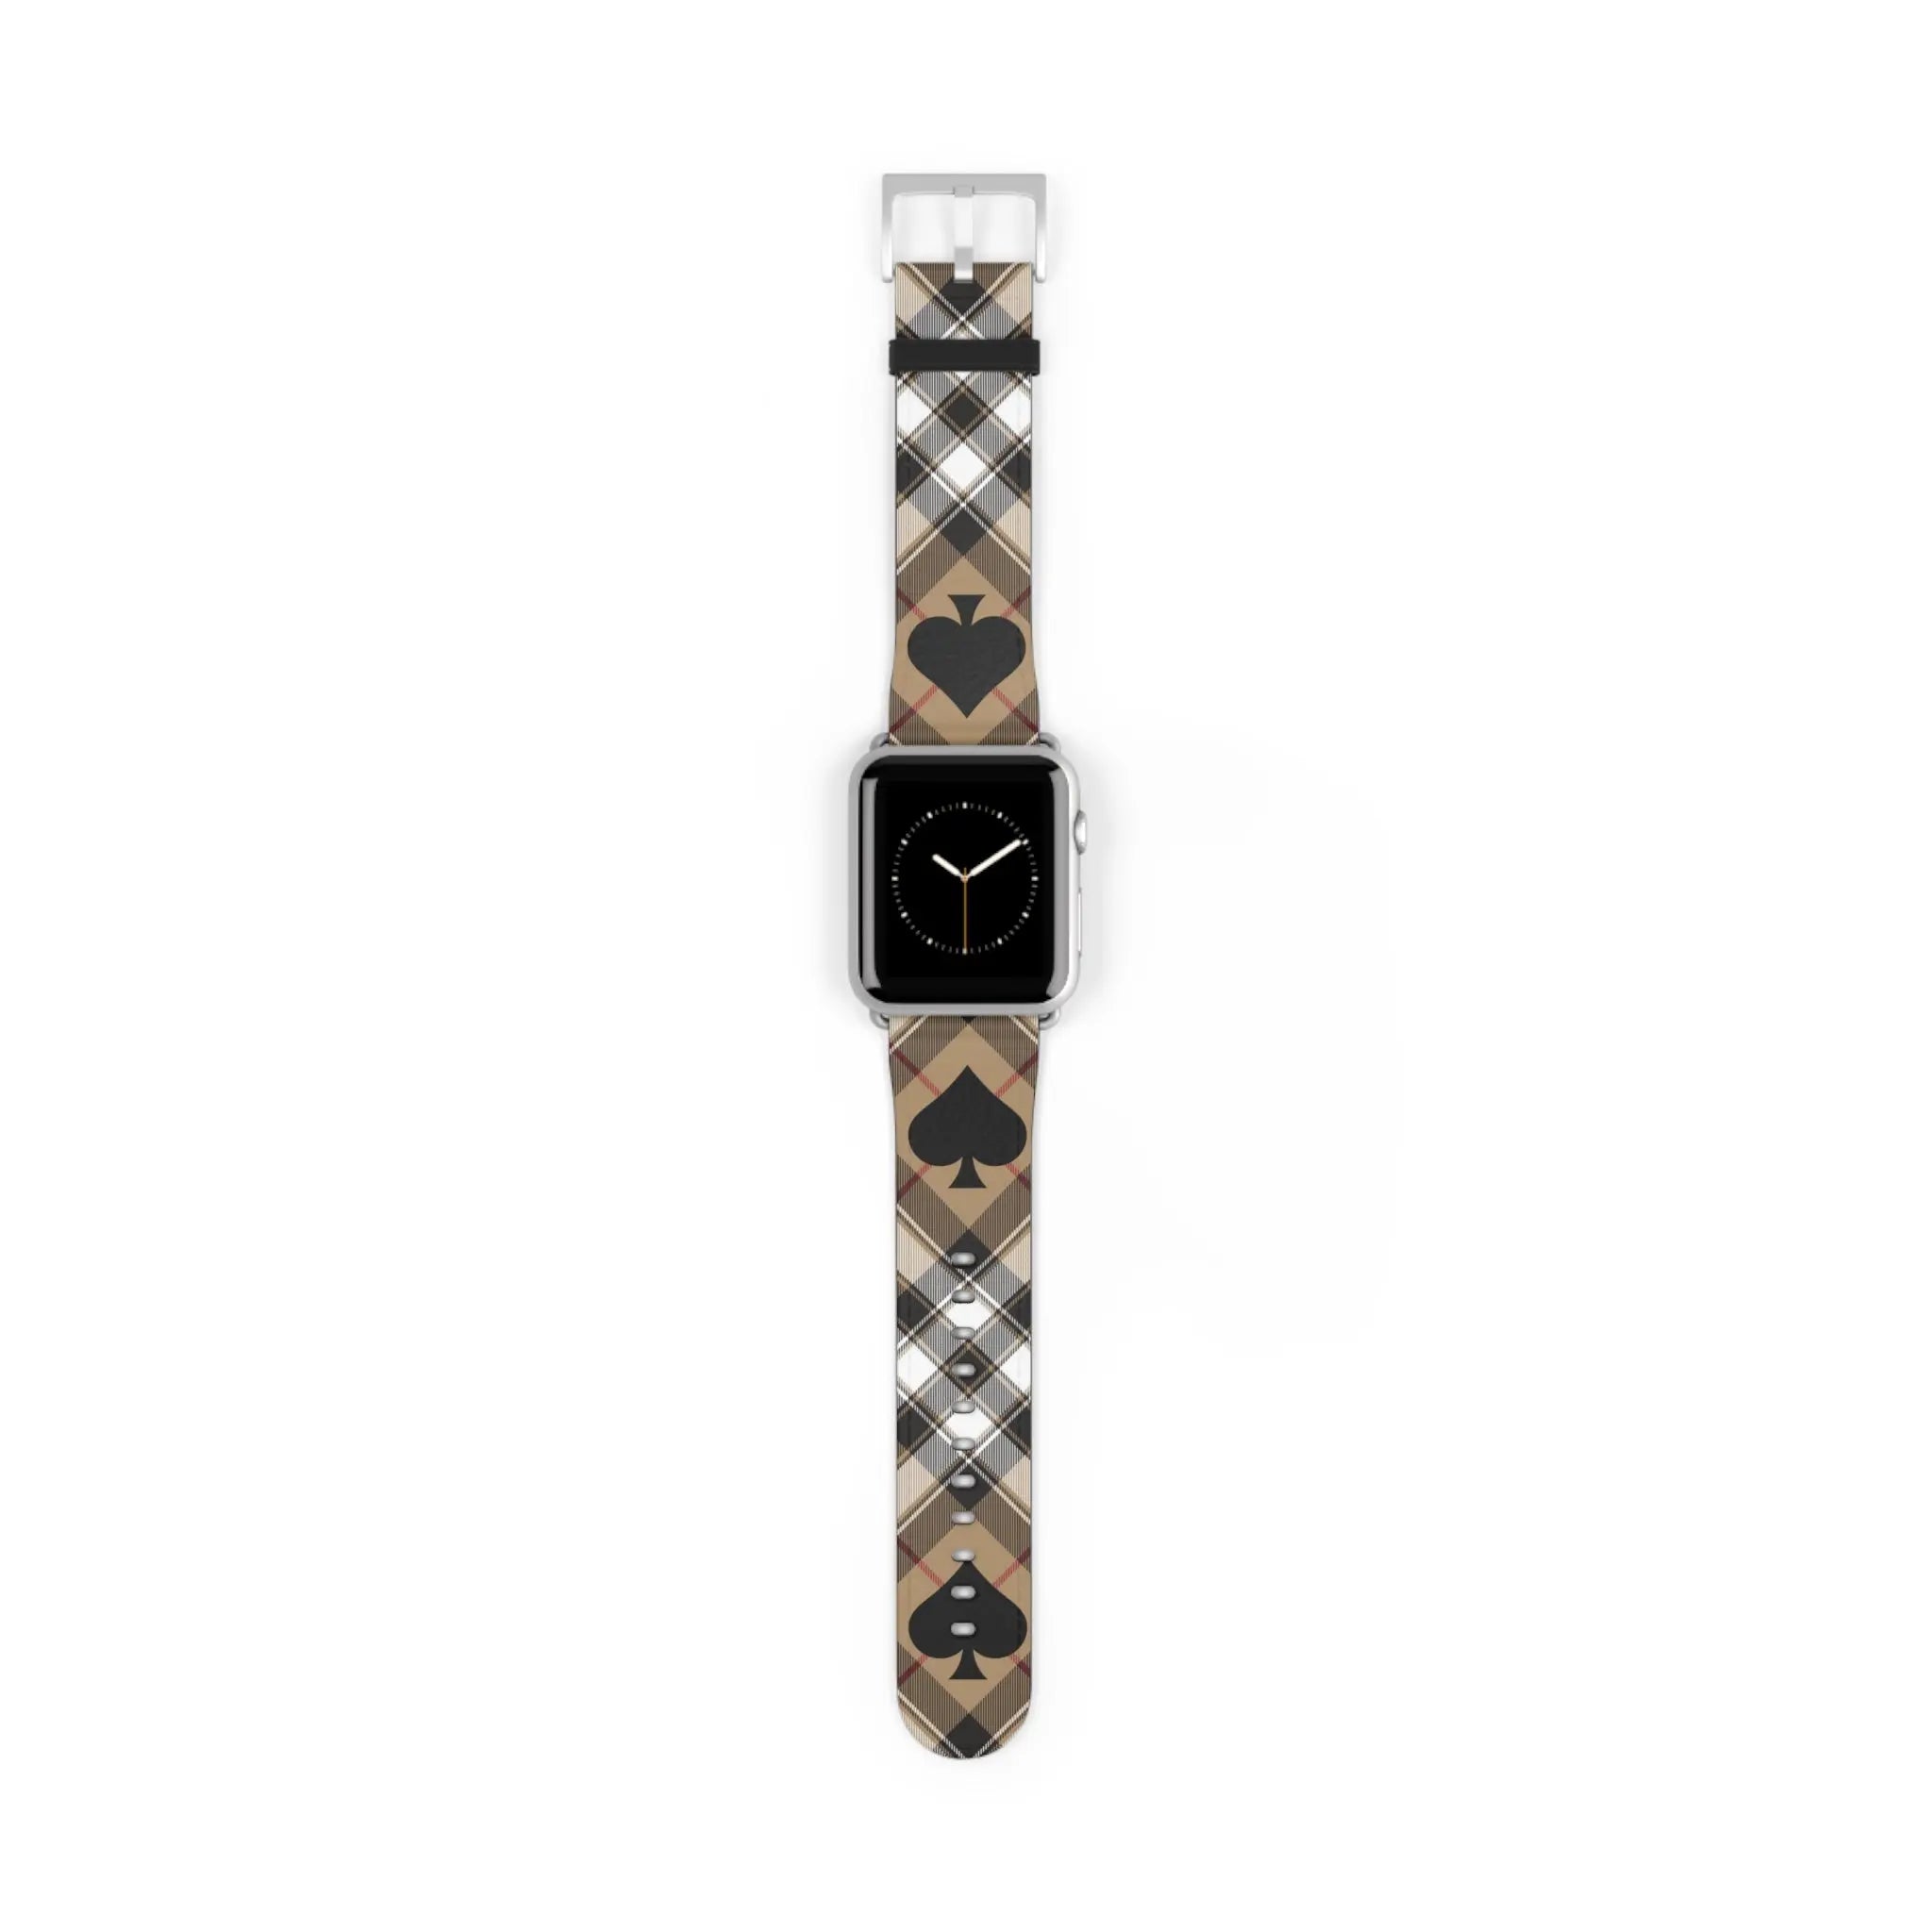  Abby Beige Ace of Spades Apple Watch Band Accessories42-45mmSilverMatte